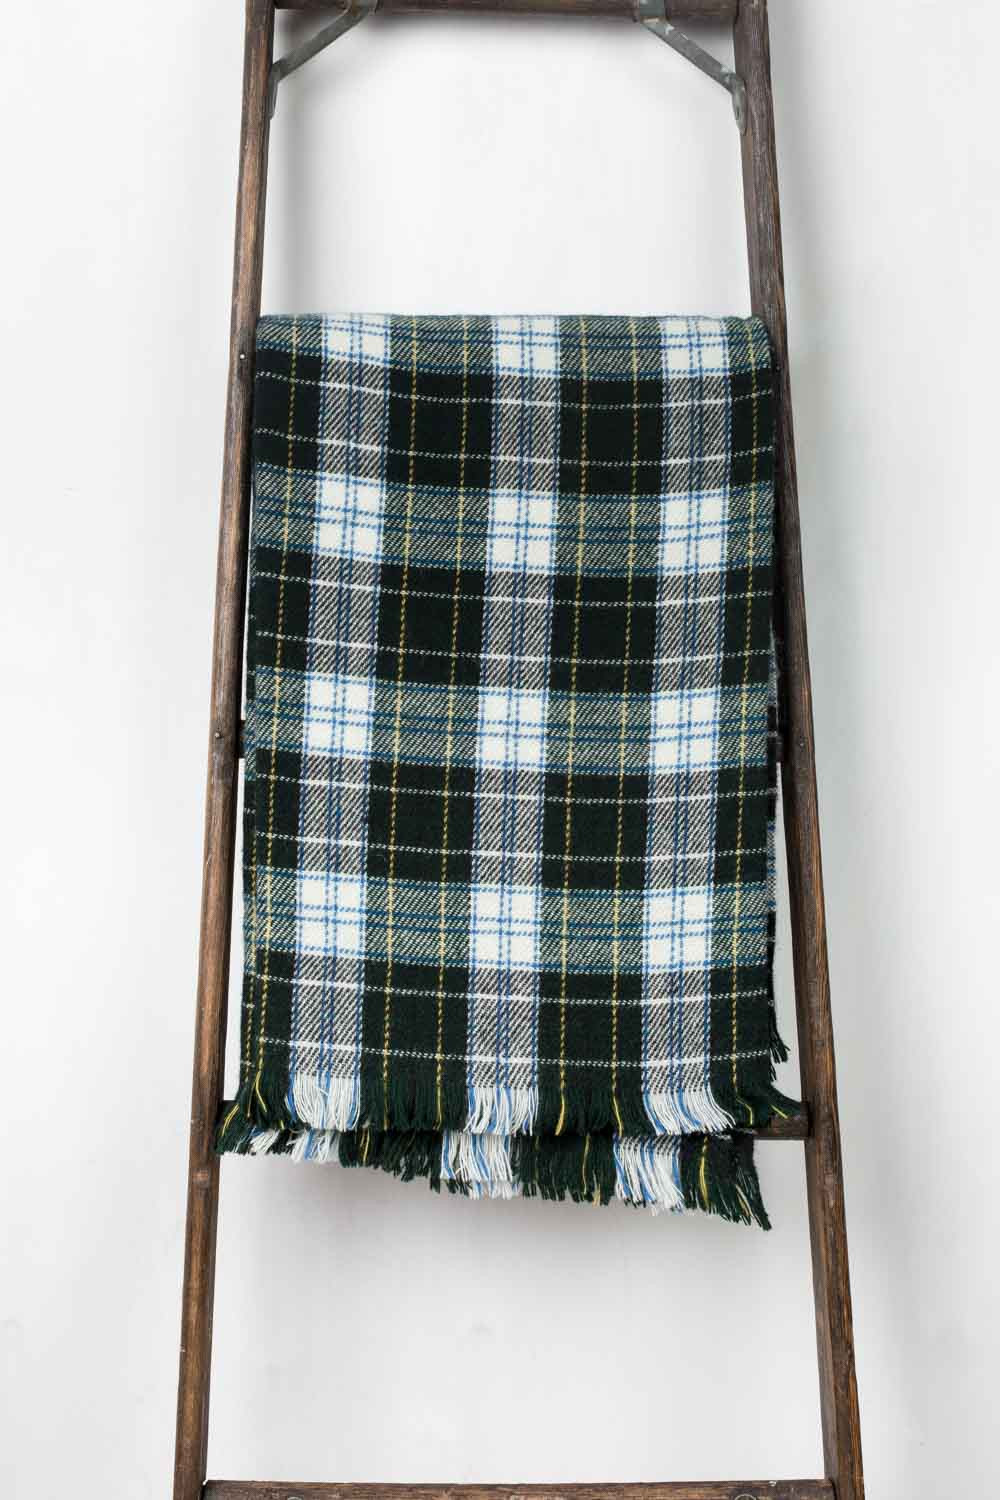 Wool Blanket by United by Blue $145